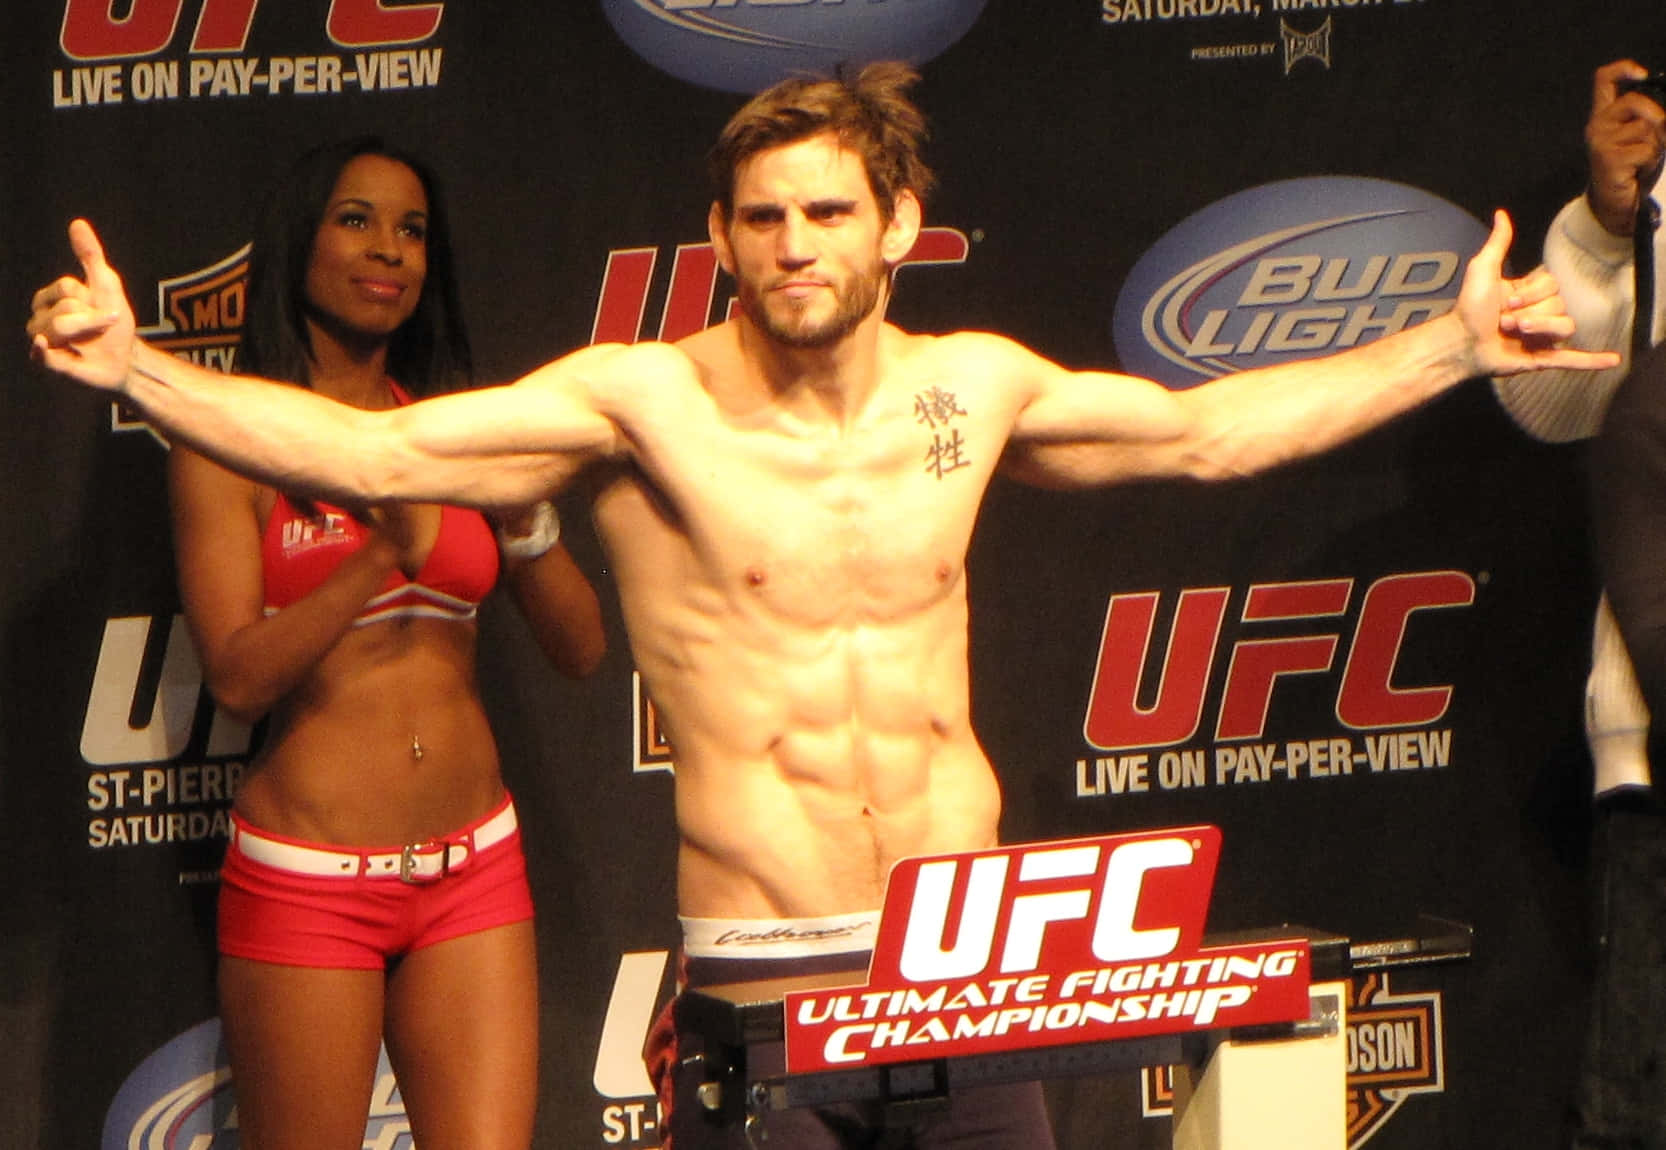 Jonfitch Pose In Der Ultimate Fighting Championship. Wallpaper